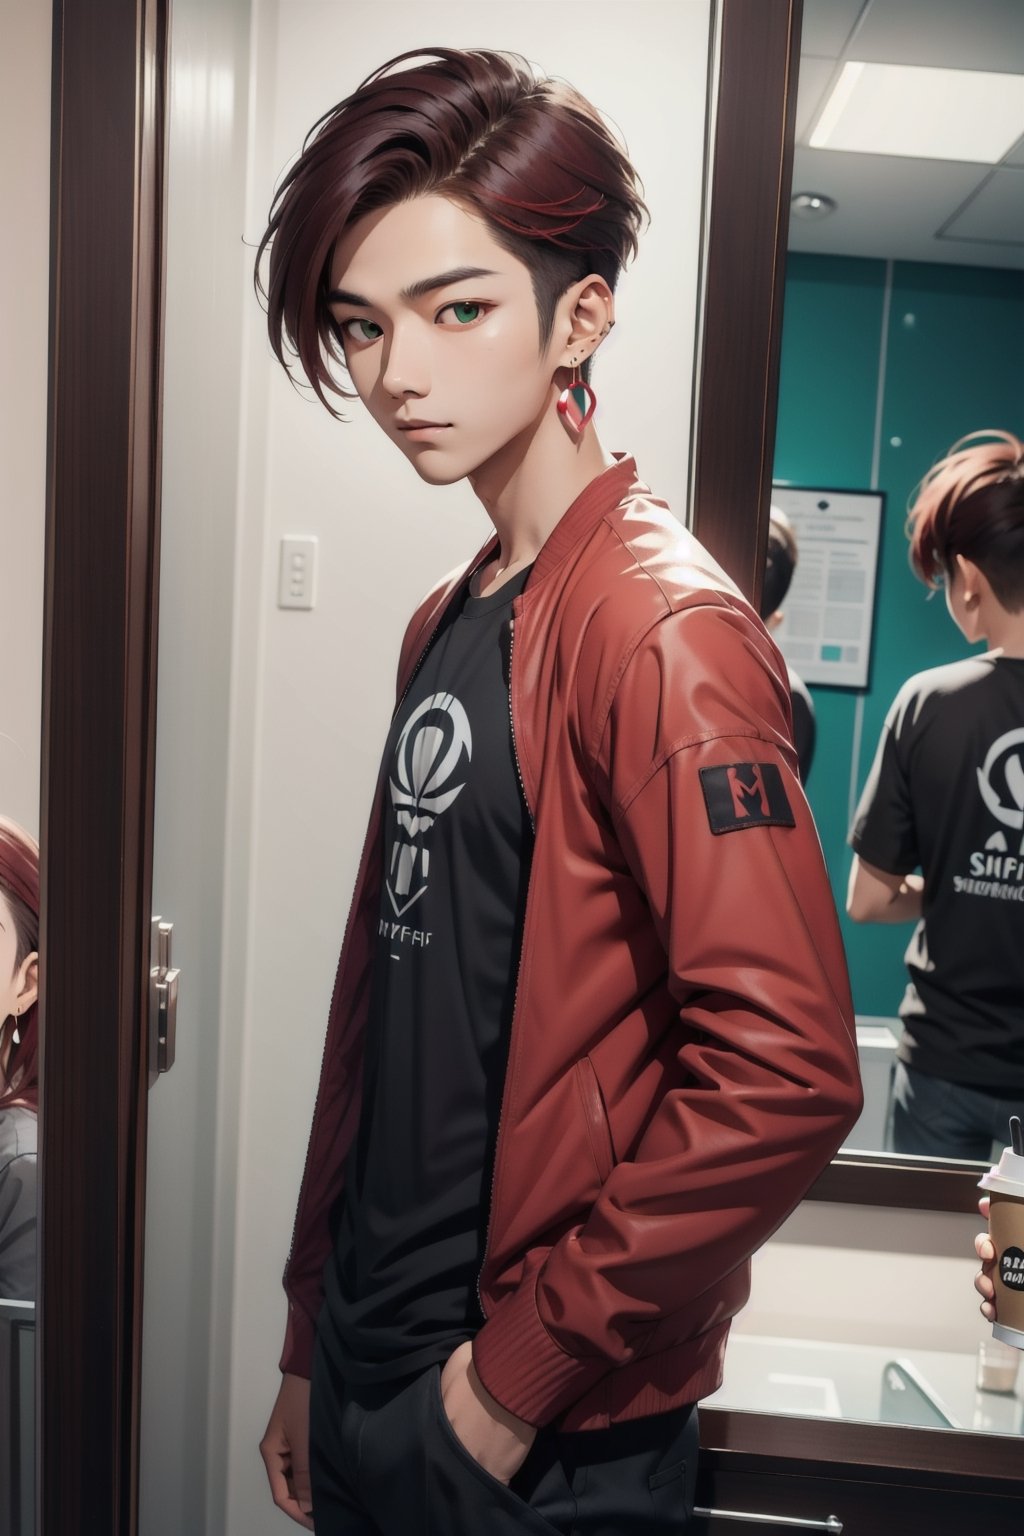 intricate detail, male face,ikemen, kpop, holding a paper coffee cup with heart logos, green eyes, handsome, earrings, glittering wine red color hair with stylish hair style, selfie, stylish, black jacket and white T-shirt with vivid color design art, earrings, young handsome asian male, vivid color, infront of mirror, realistic skin color, realistic right reflection